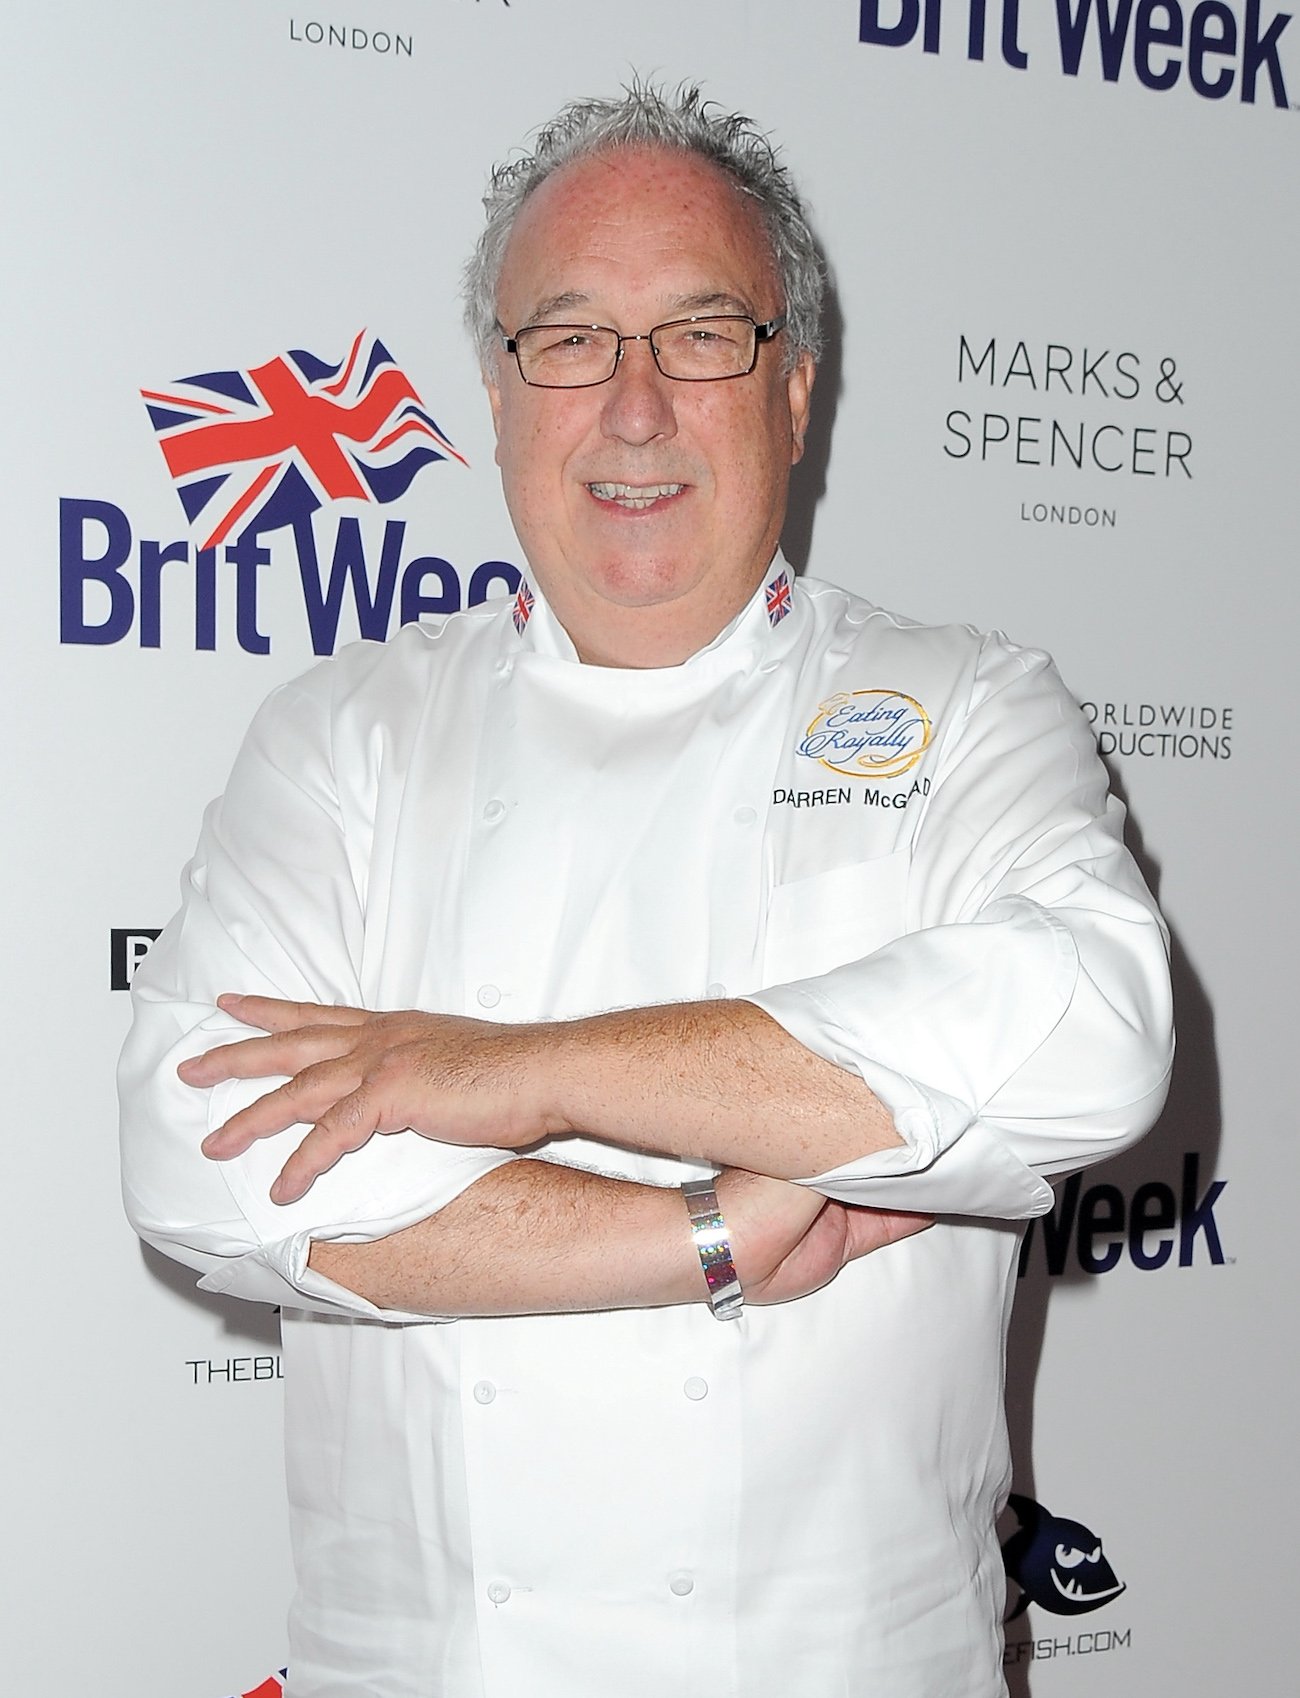 Darren McGrady smiles with his arms folds over his chest wearing a white chef's coat at BritWeek's 10th Anniversary Reception in 2016